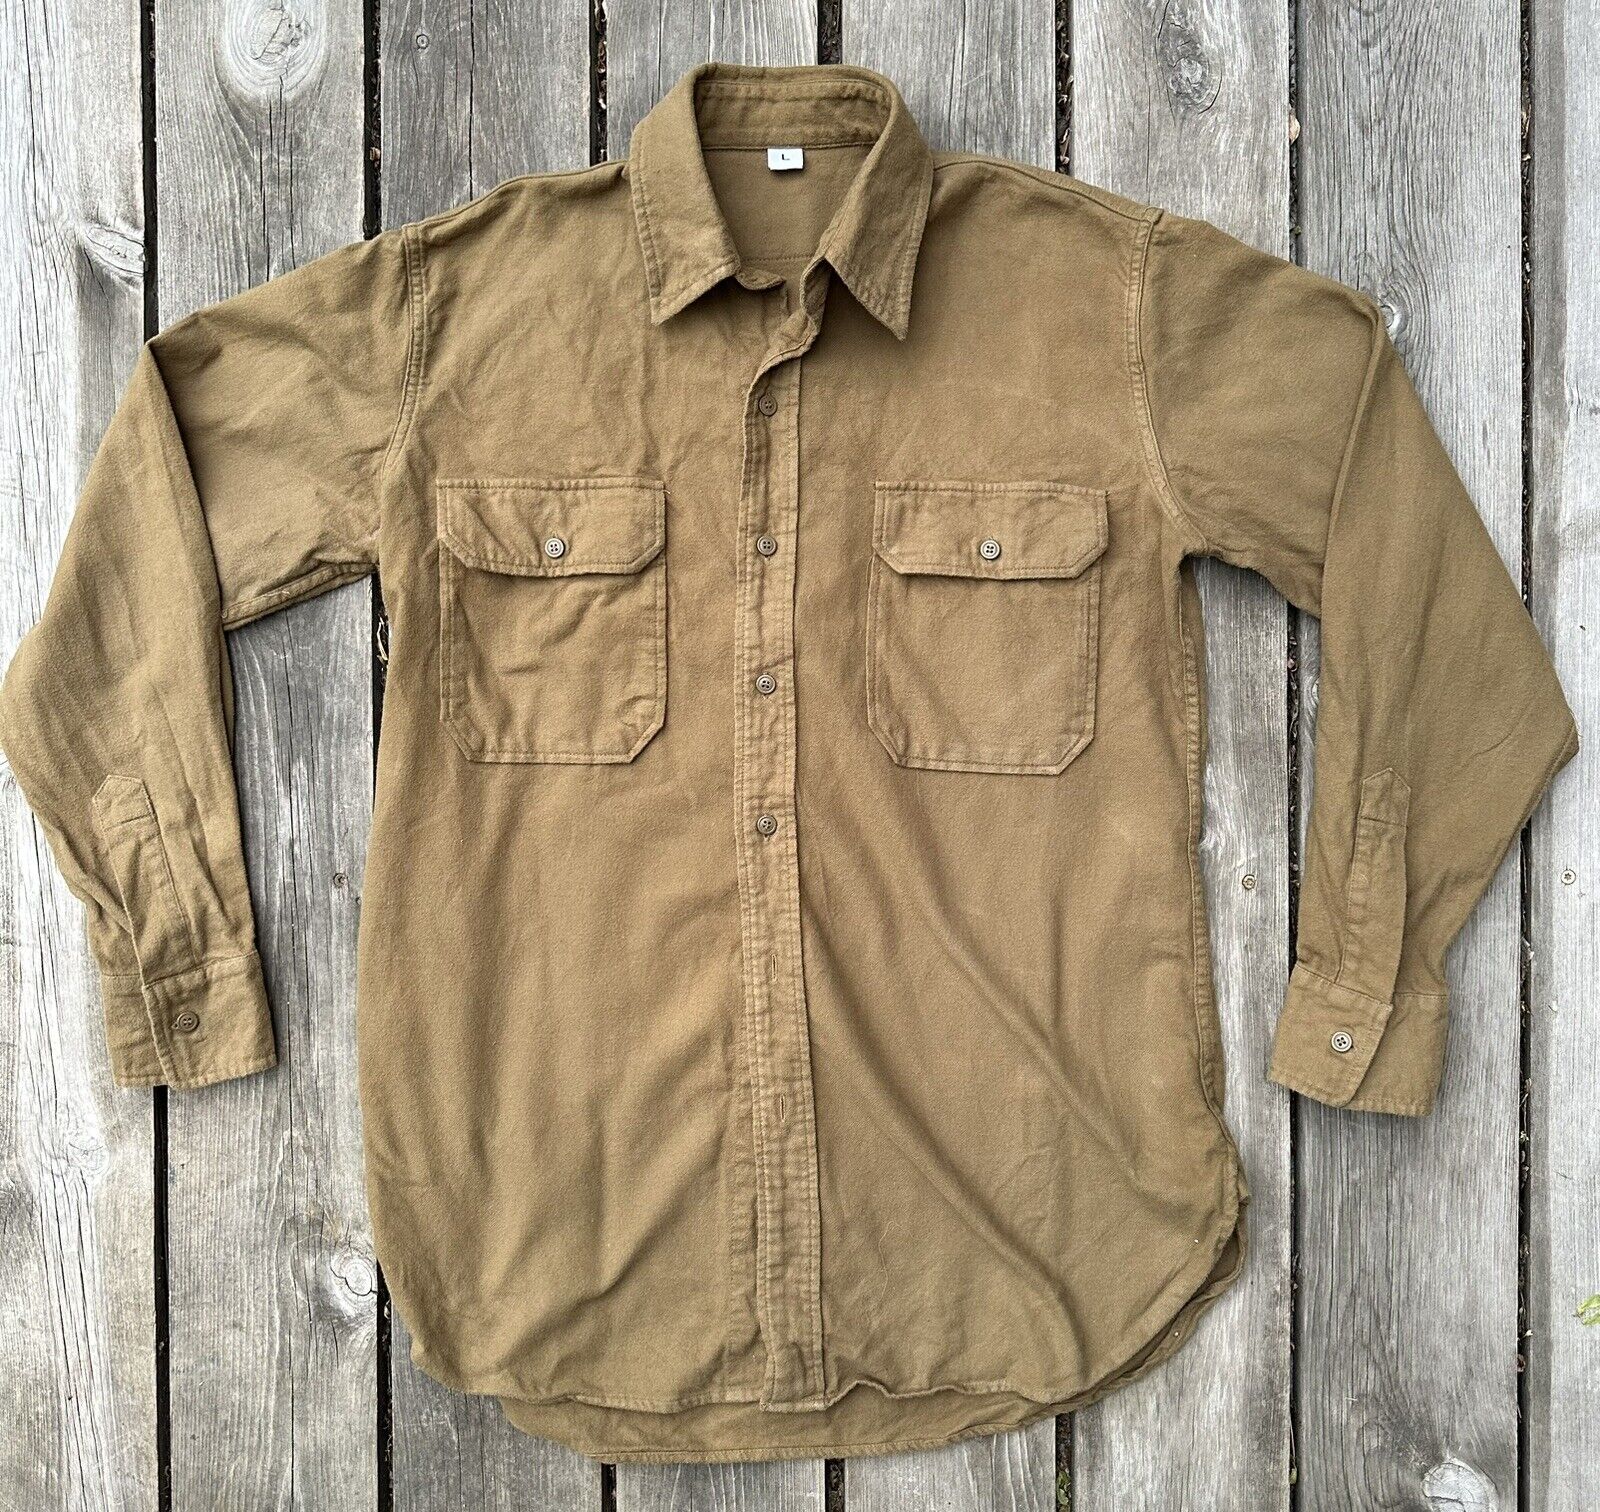 At The Front Made Made US Service Shirt/Marked Size Large/ Fits Like an XL